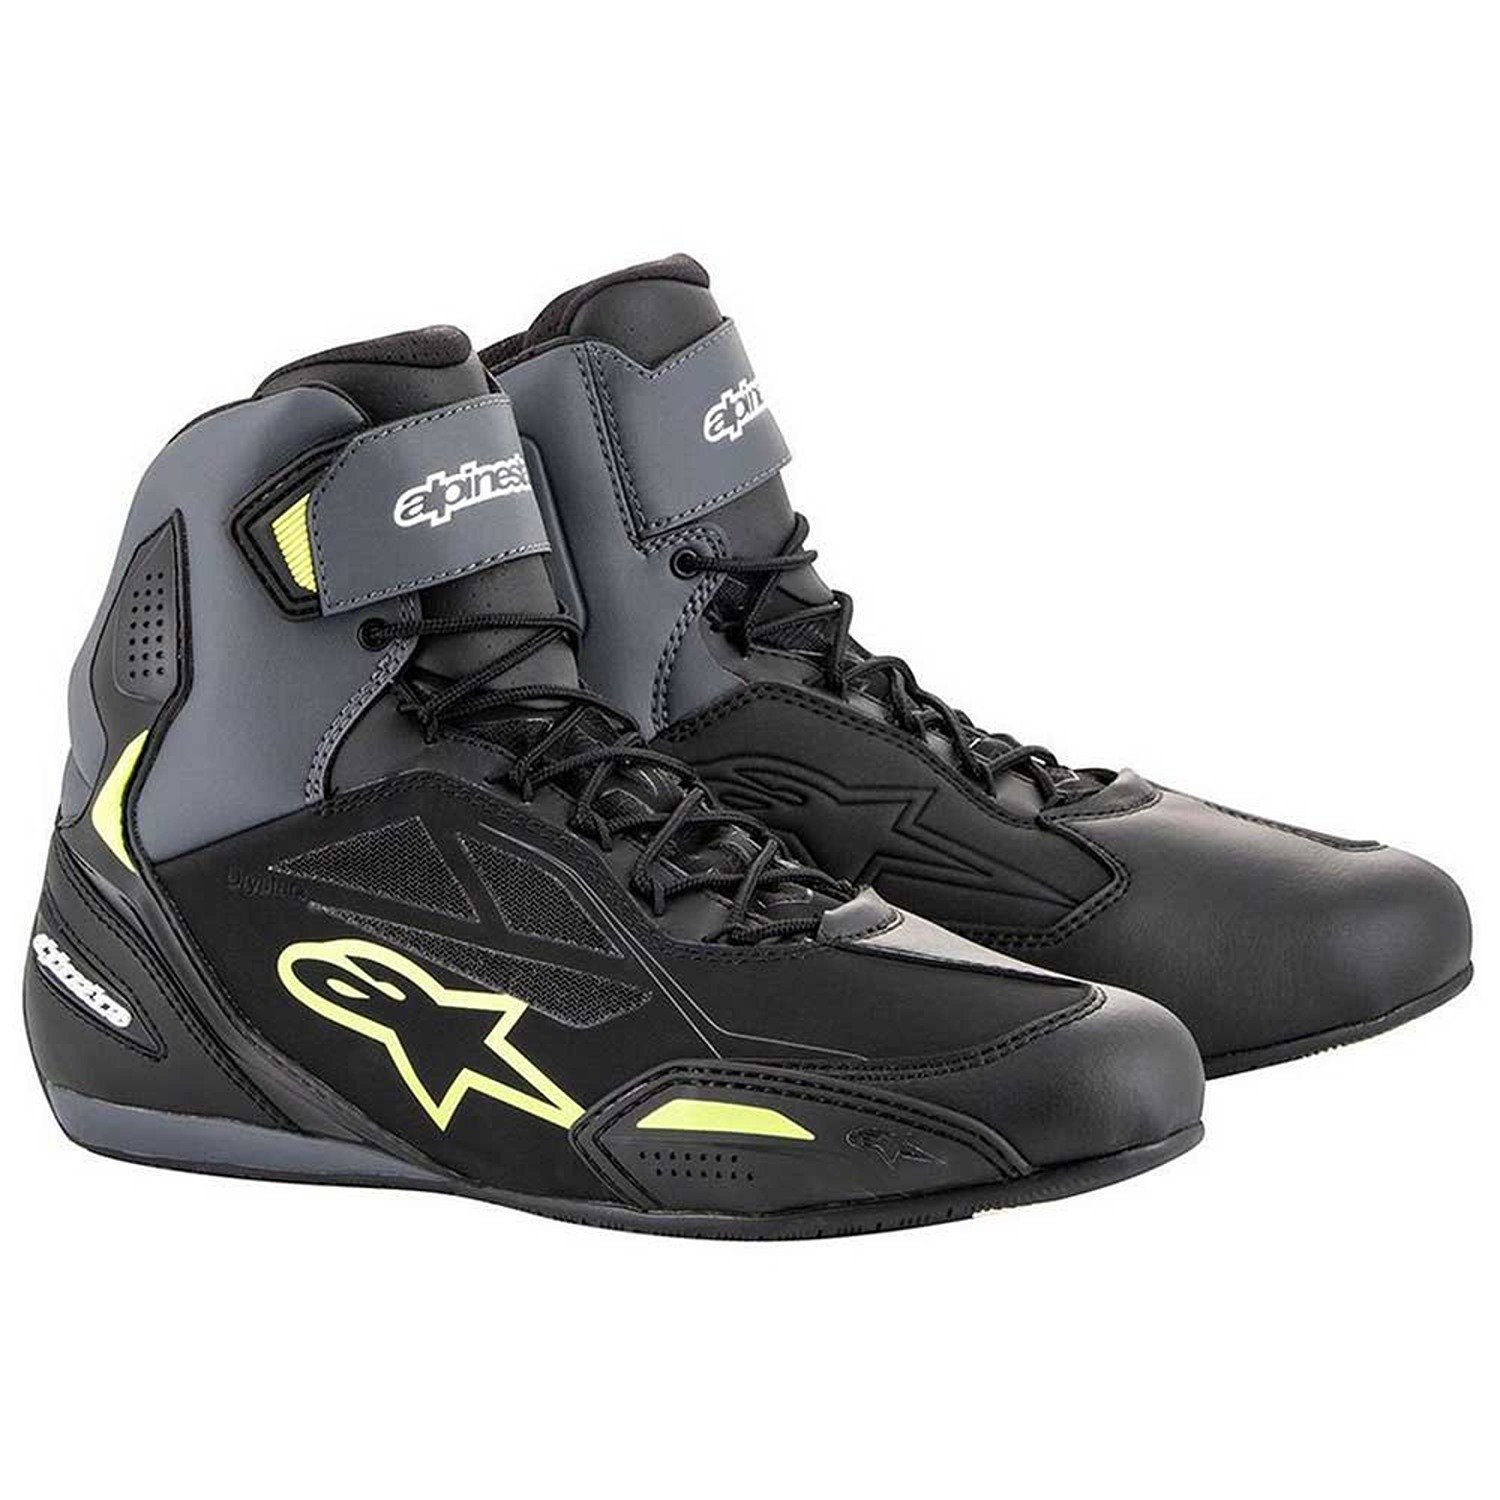 Image of Alpinestars Faster-3 Shoes Black Yellow Fluo Größe US 95